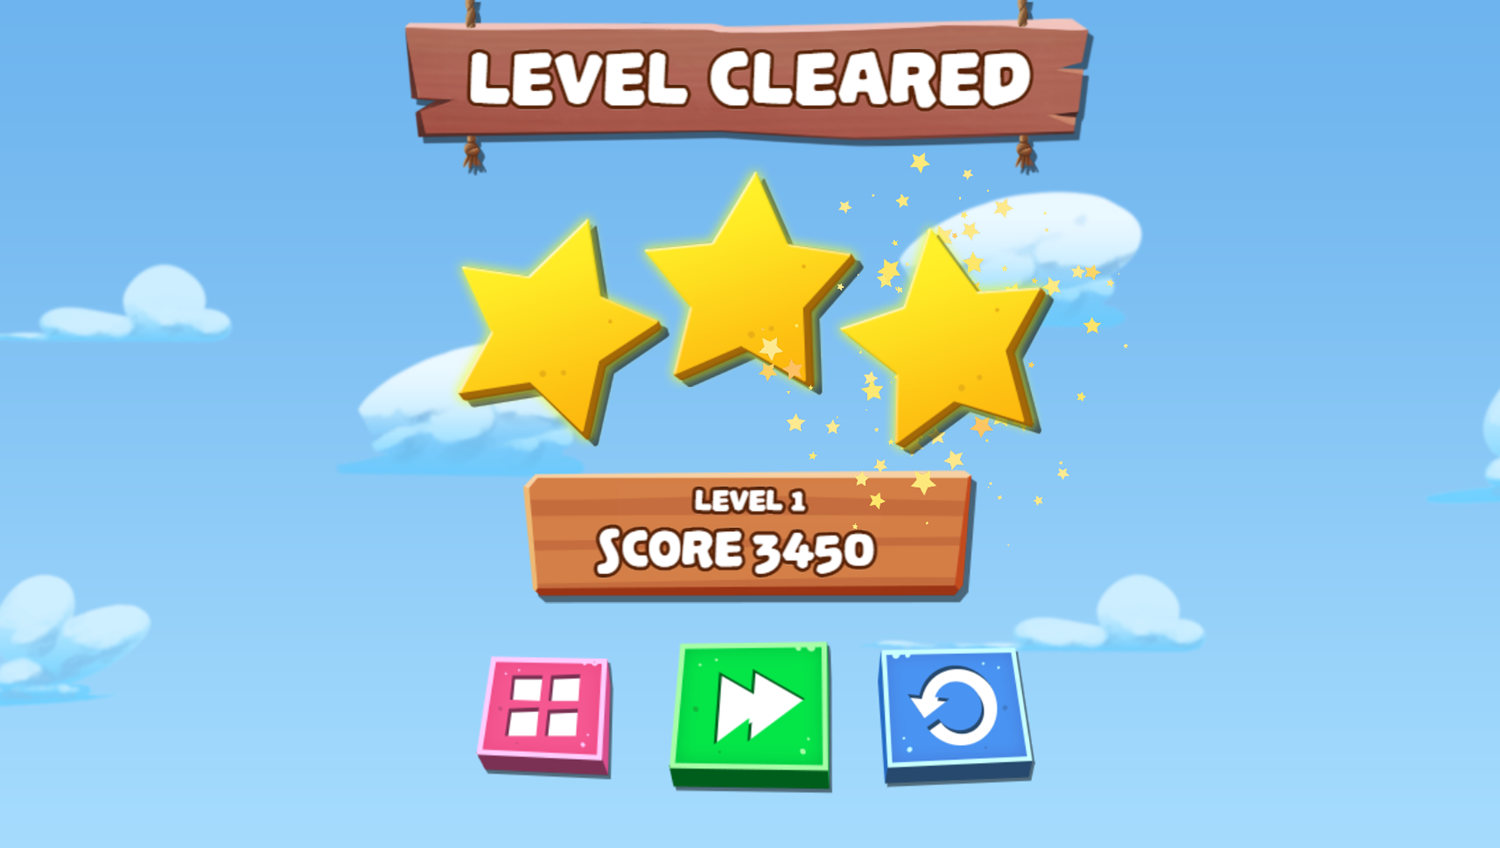 Grizzy and the Lemmings Lemmings Launch Game Level Cleared Screenshot.